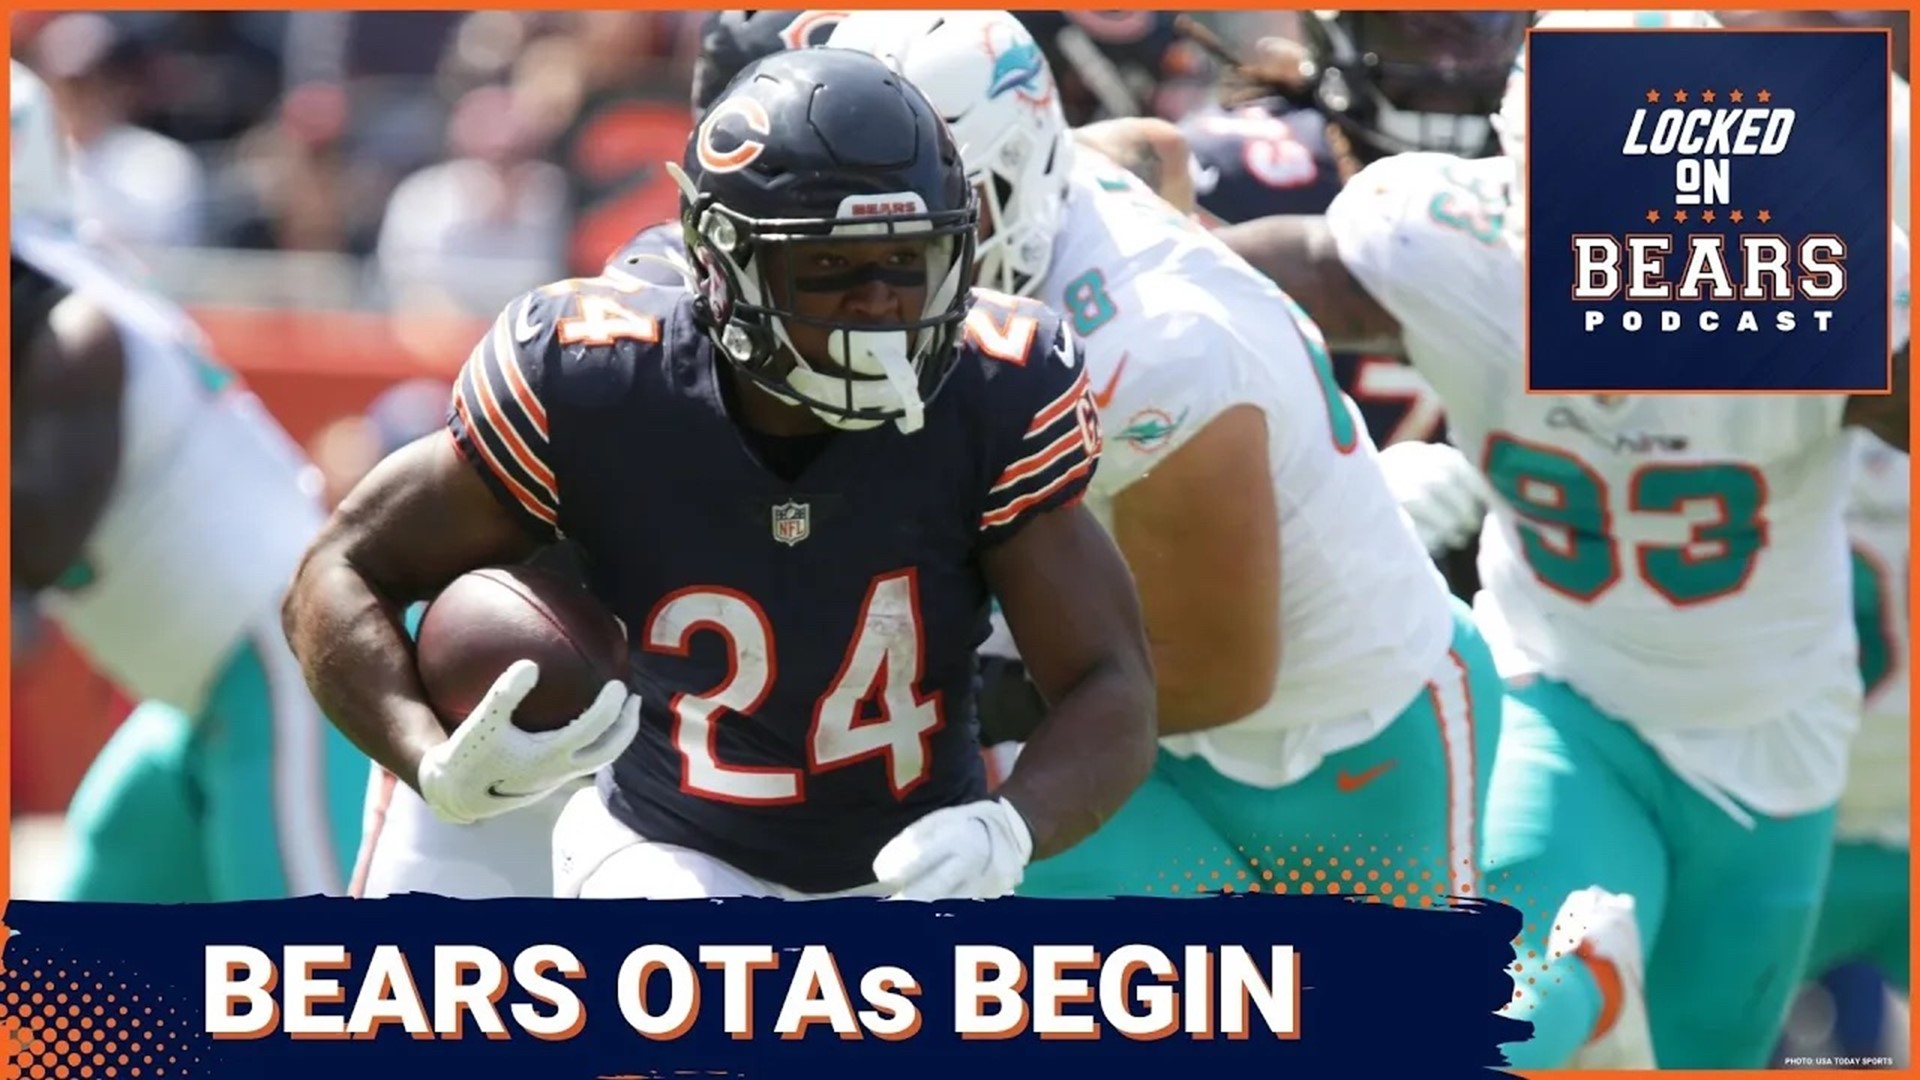 Organized team activities (OTAs) are the first chance for the Chicago Bears to see their new roster in action on the practice field.